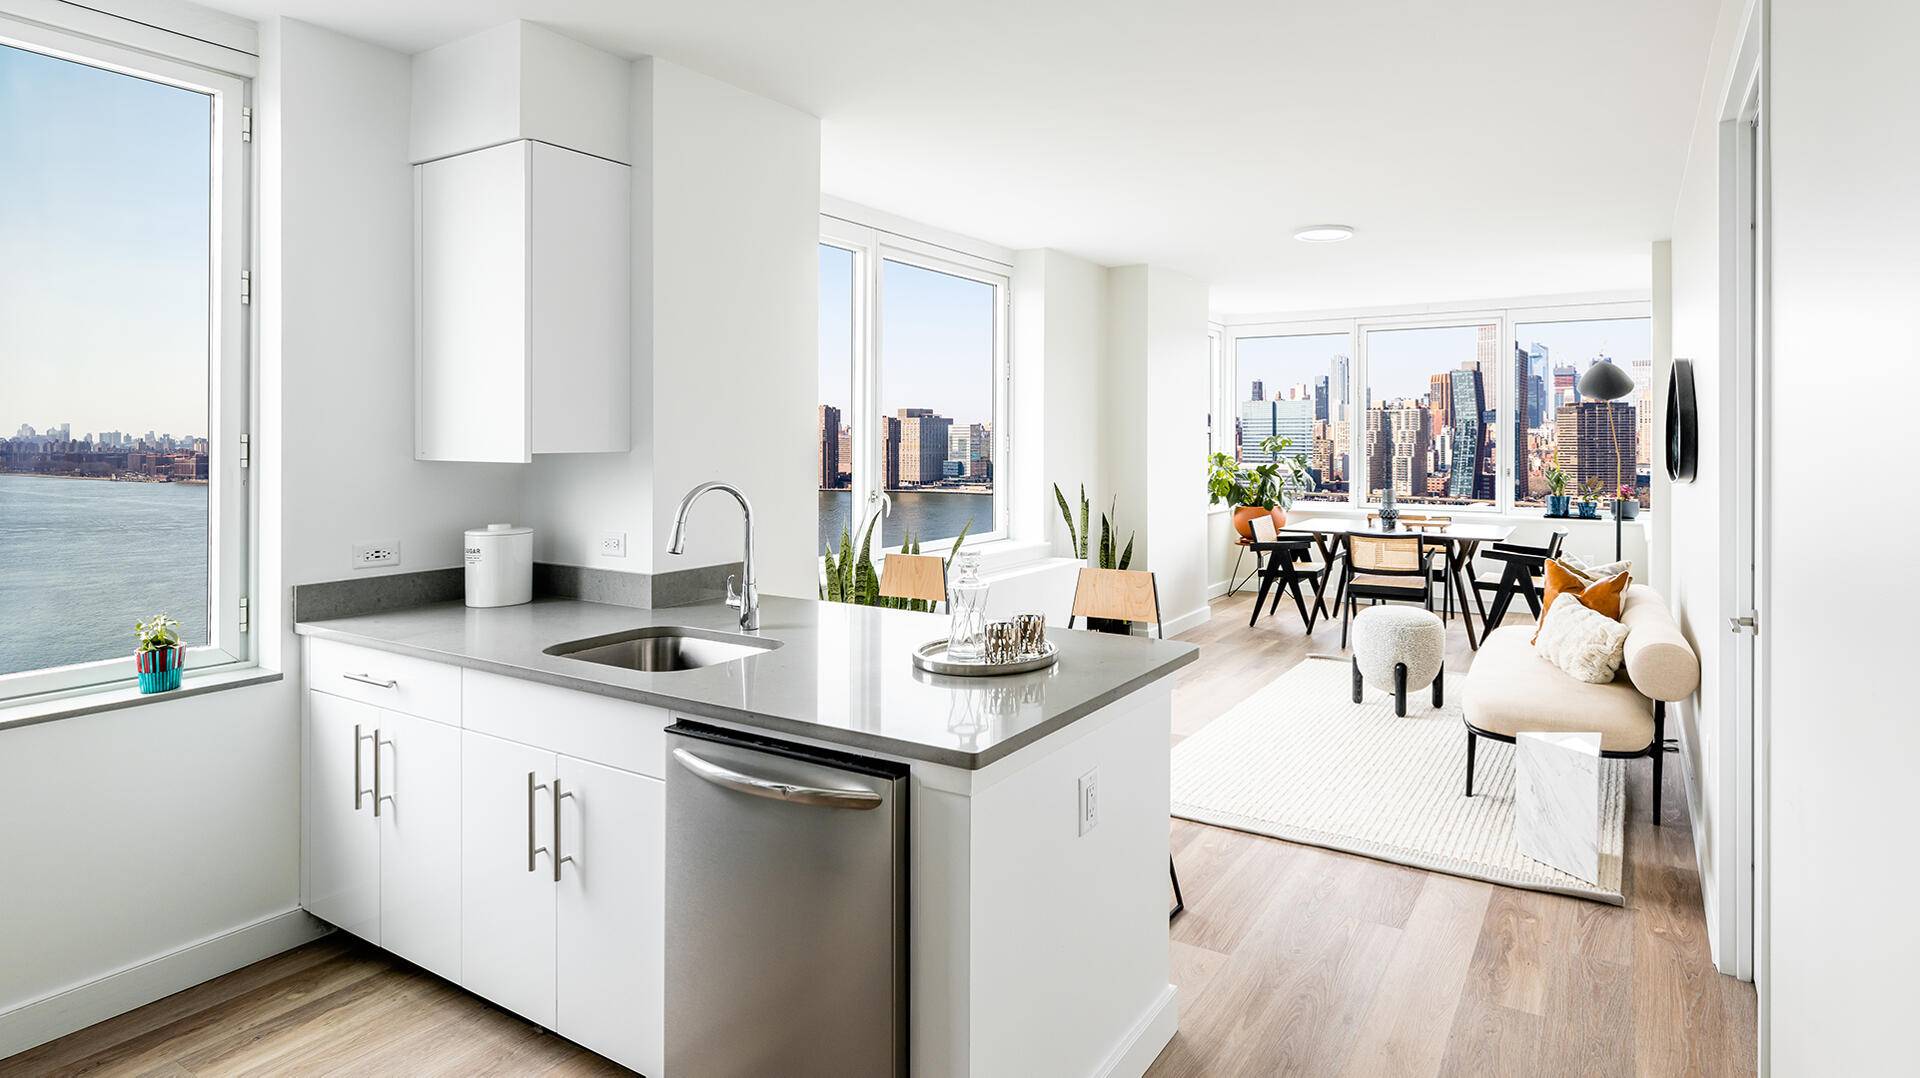 NO FEE, SPECTACULAR CORNER 2 BED/2 BATH IN A LIC LUXURY BUILDING WITH VIEWS OF MANHATTAN SKYLINE